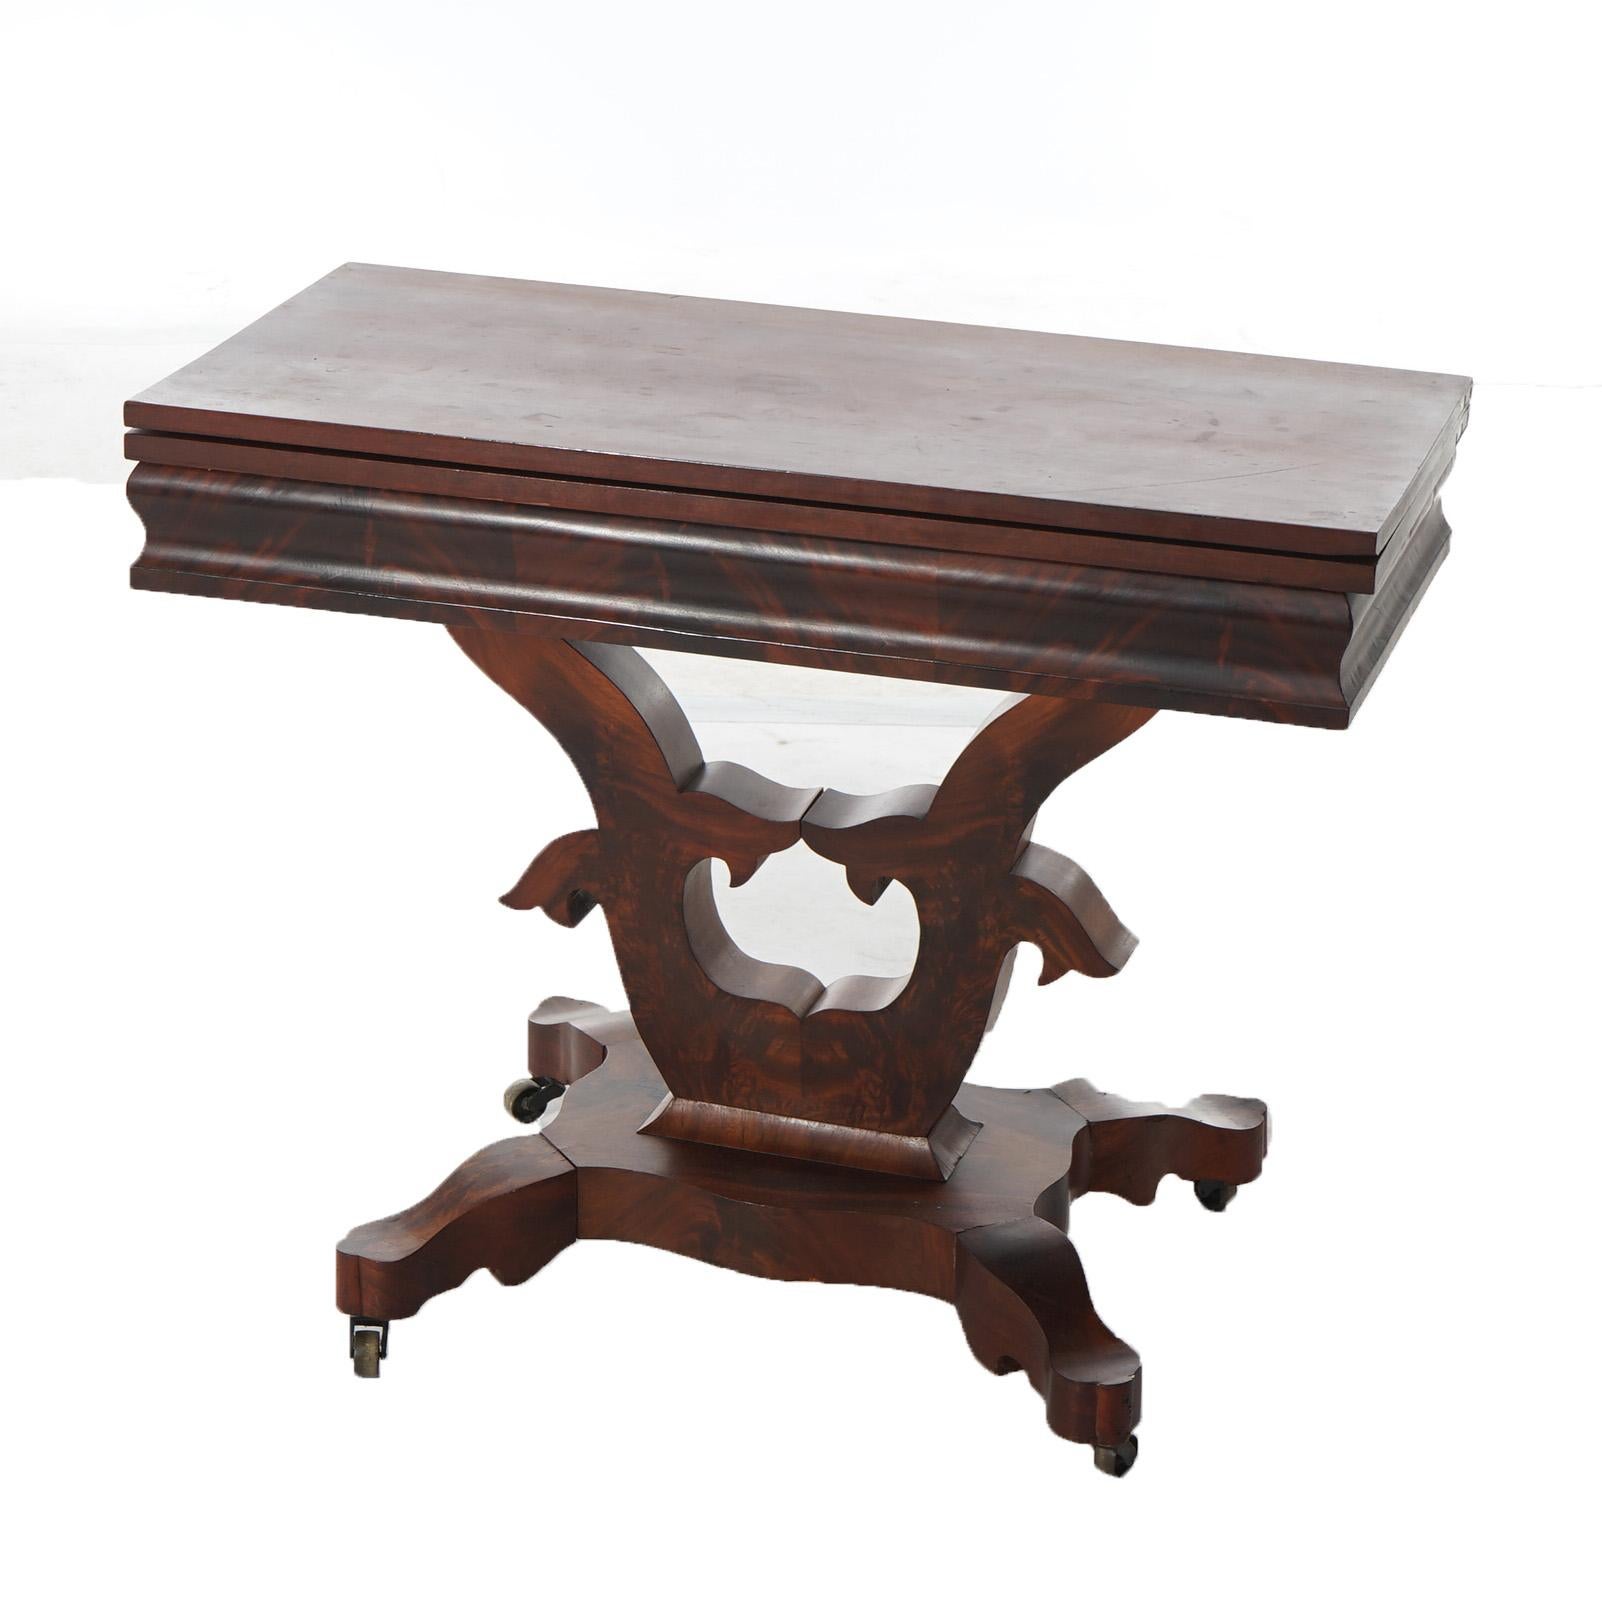 Antique American Empire Neoclassical Greco Flame Mahogany Card Table C1840 For Sale 2